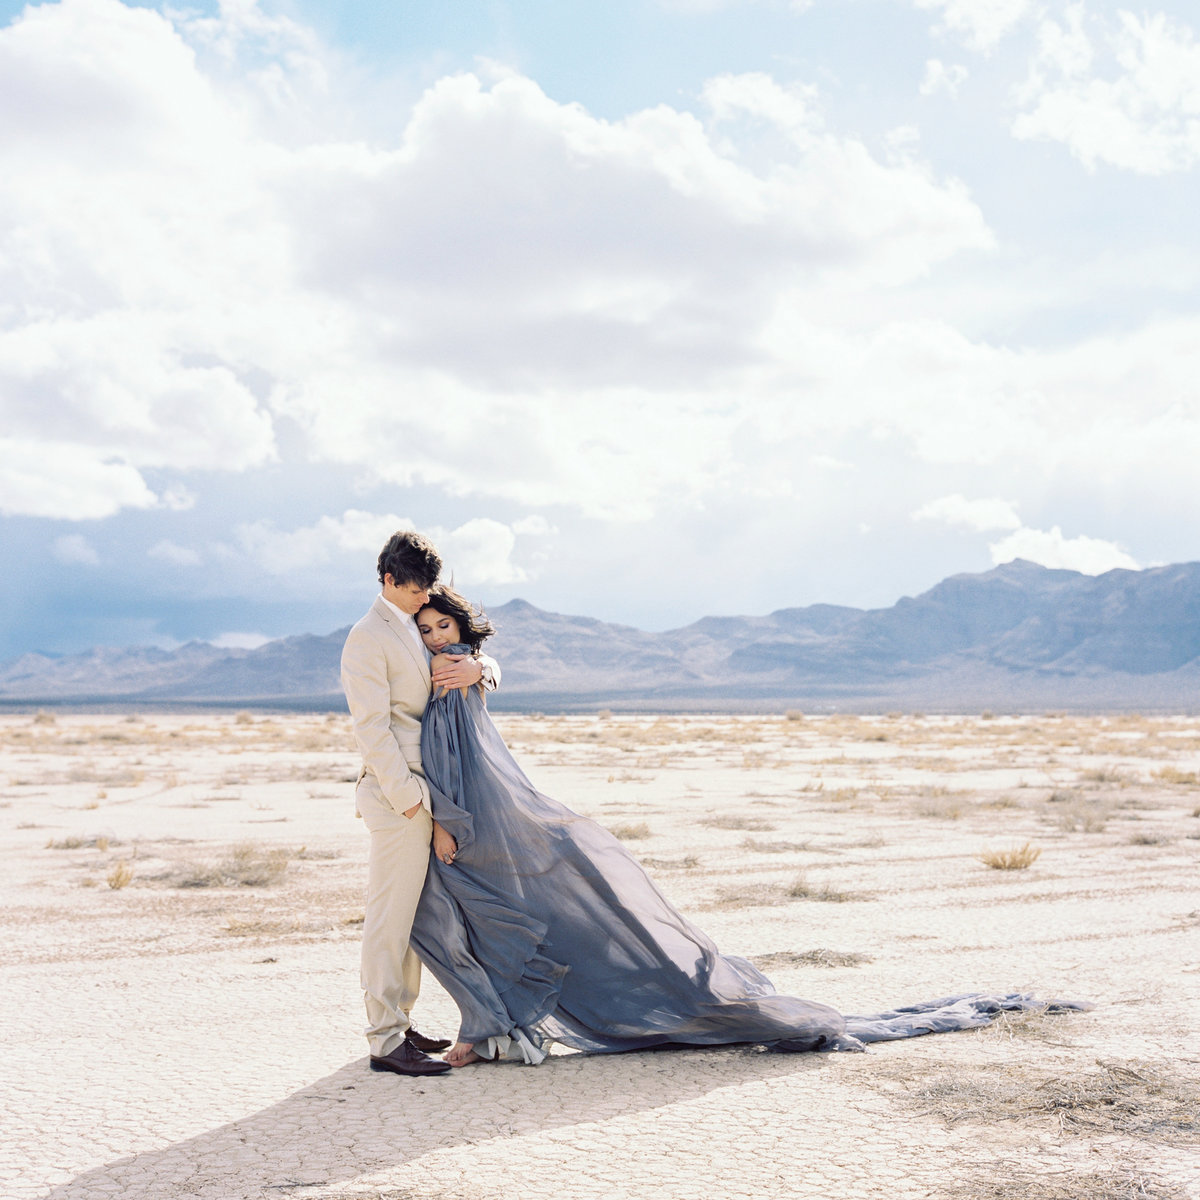 philip-casey-photography-desert-oasis-editorial-session-14